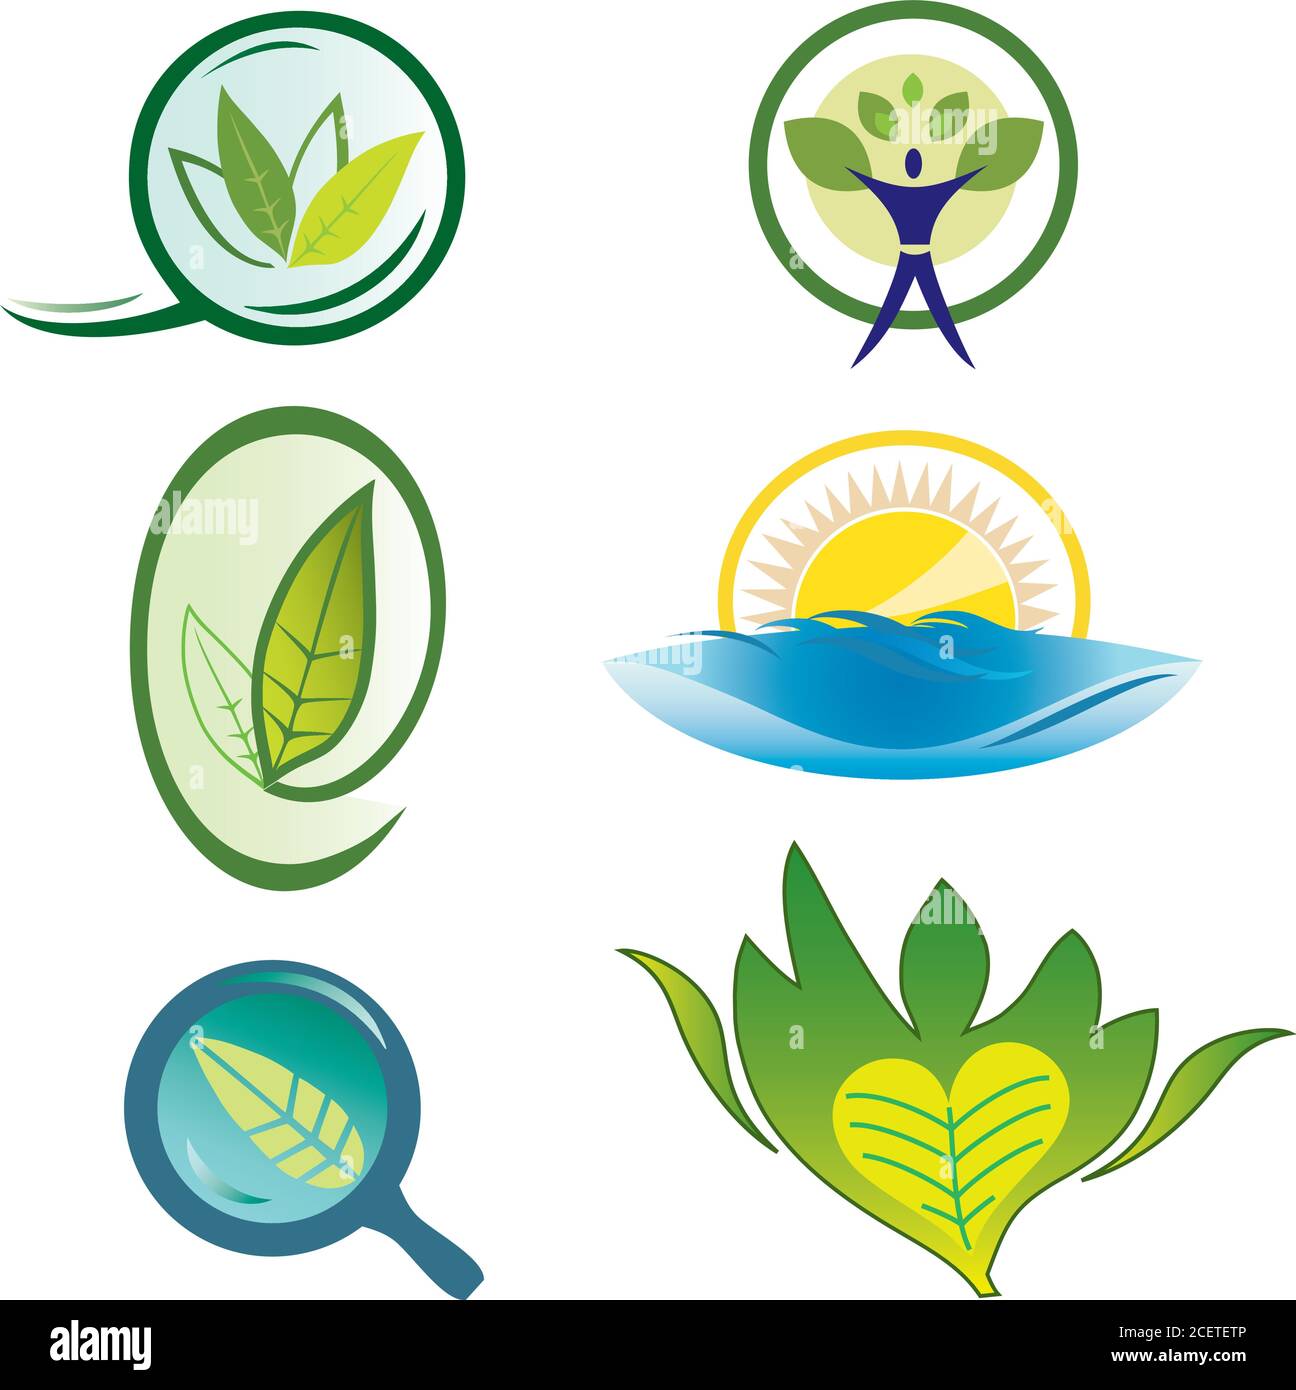 Set of Six Nature Icons - Foliage Elements in Blue and Green Colors Stock Vector